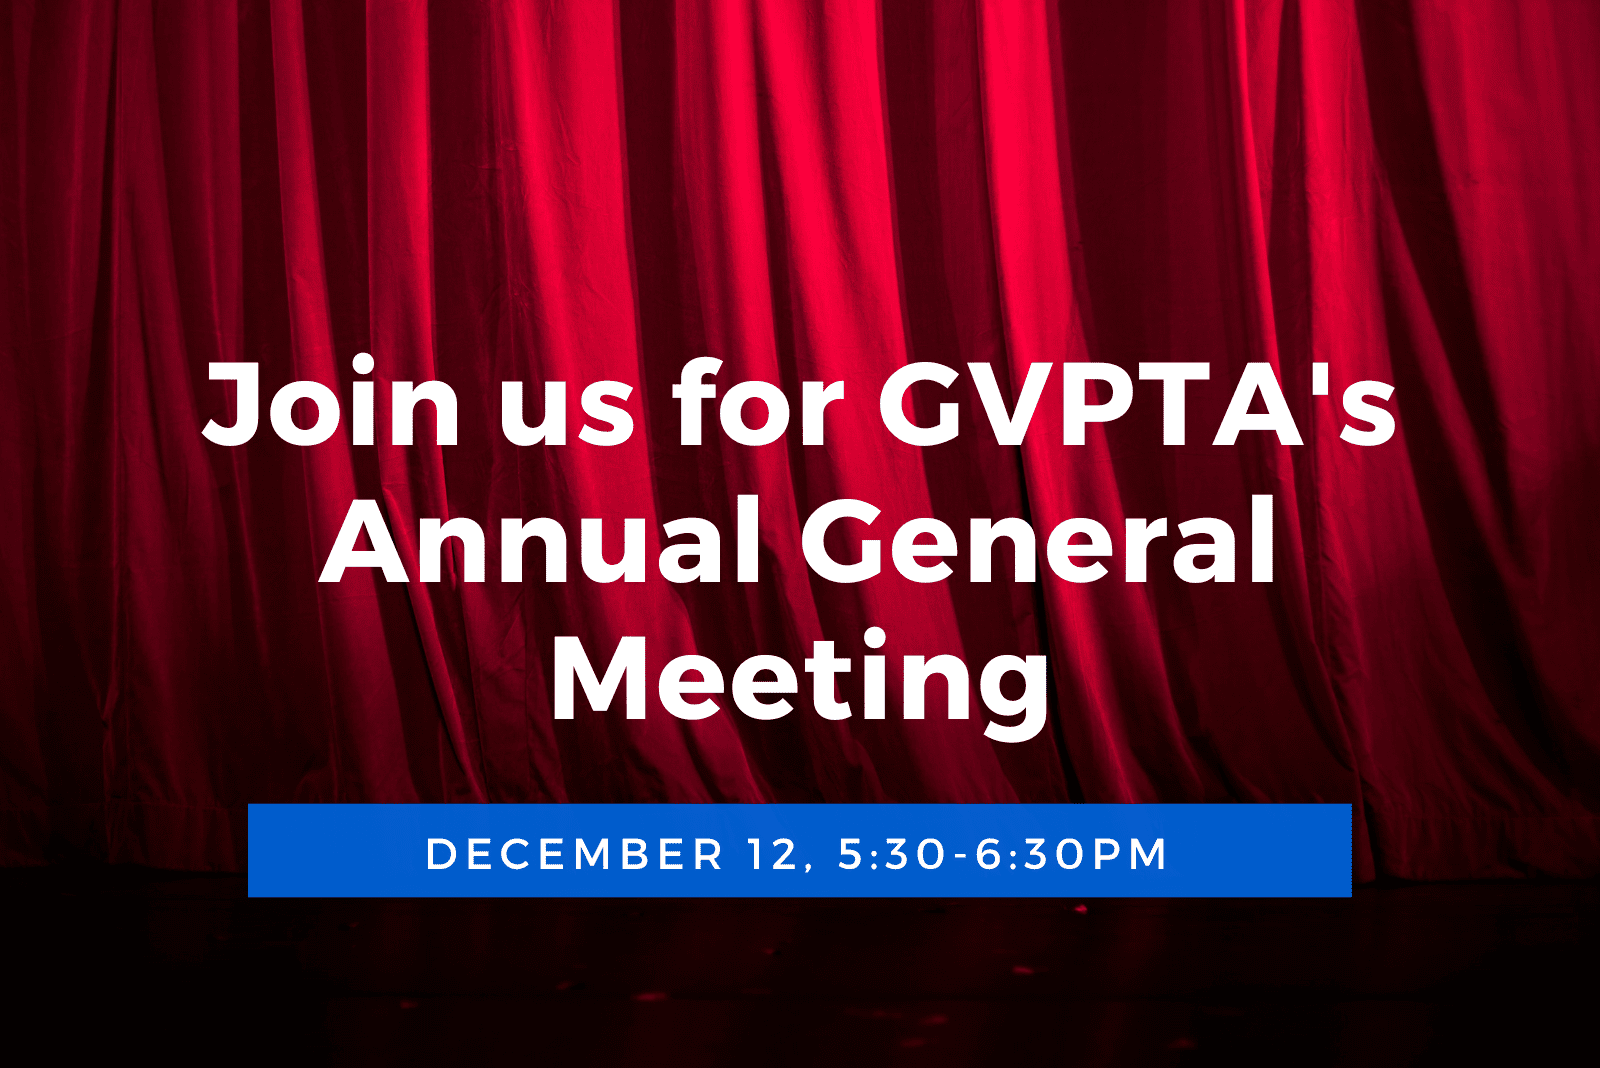 Join us for GVPTA's Annual General Meeting